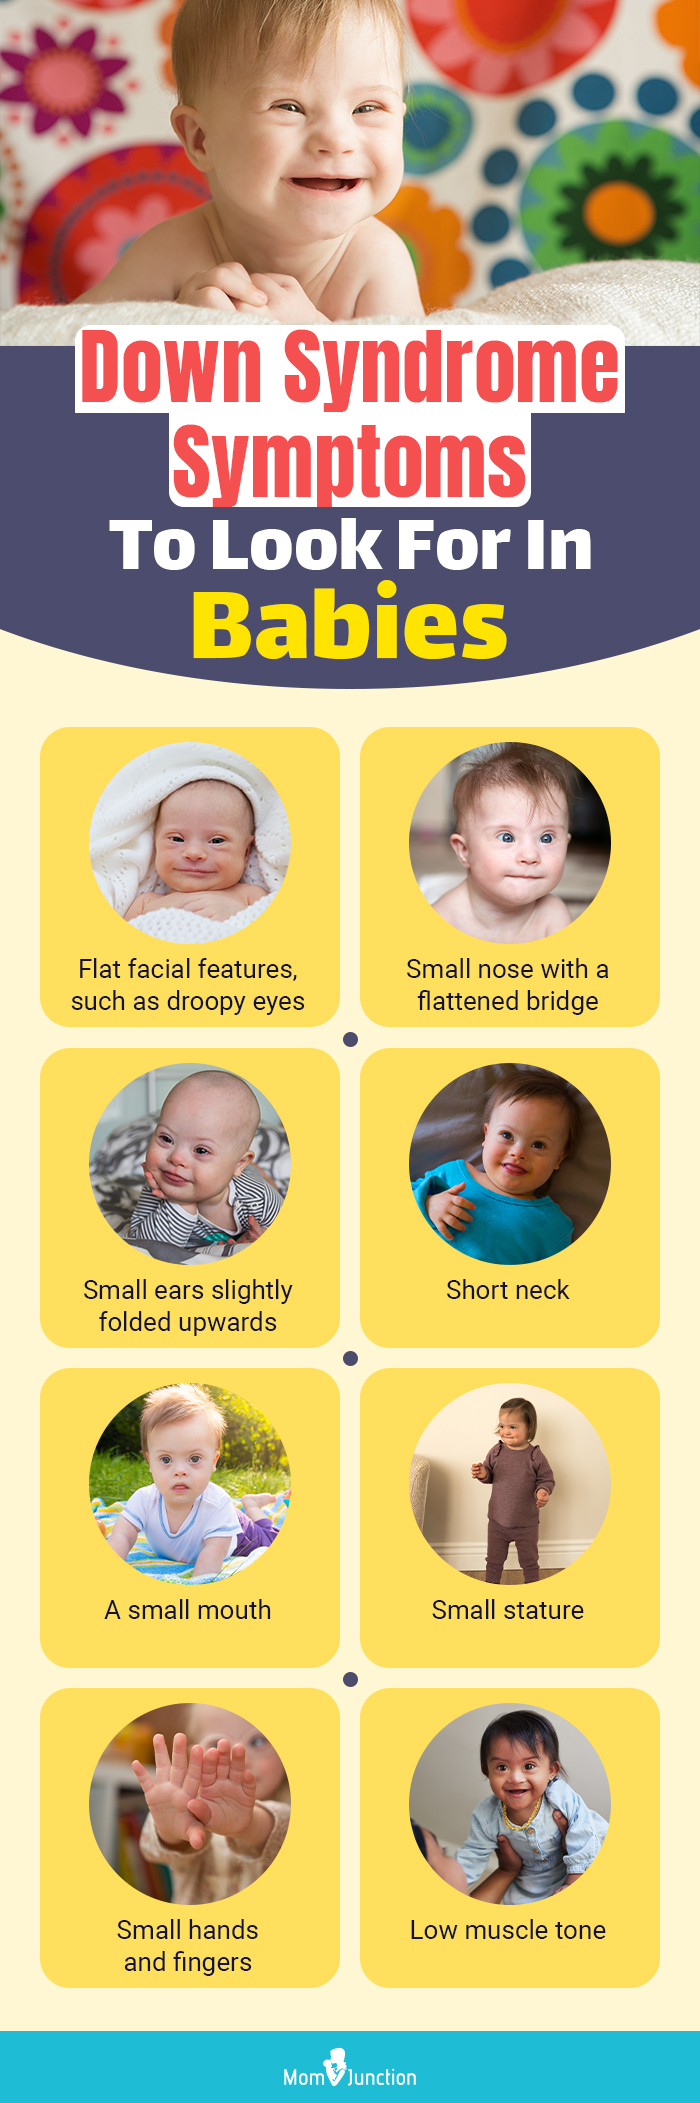 Down Syndrome Symptoms To Look For In Babies 